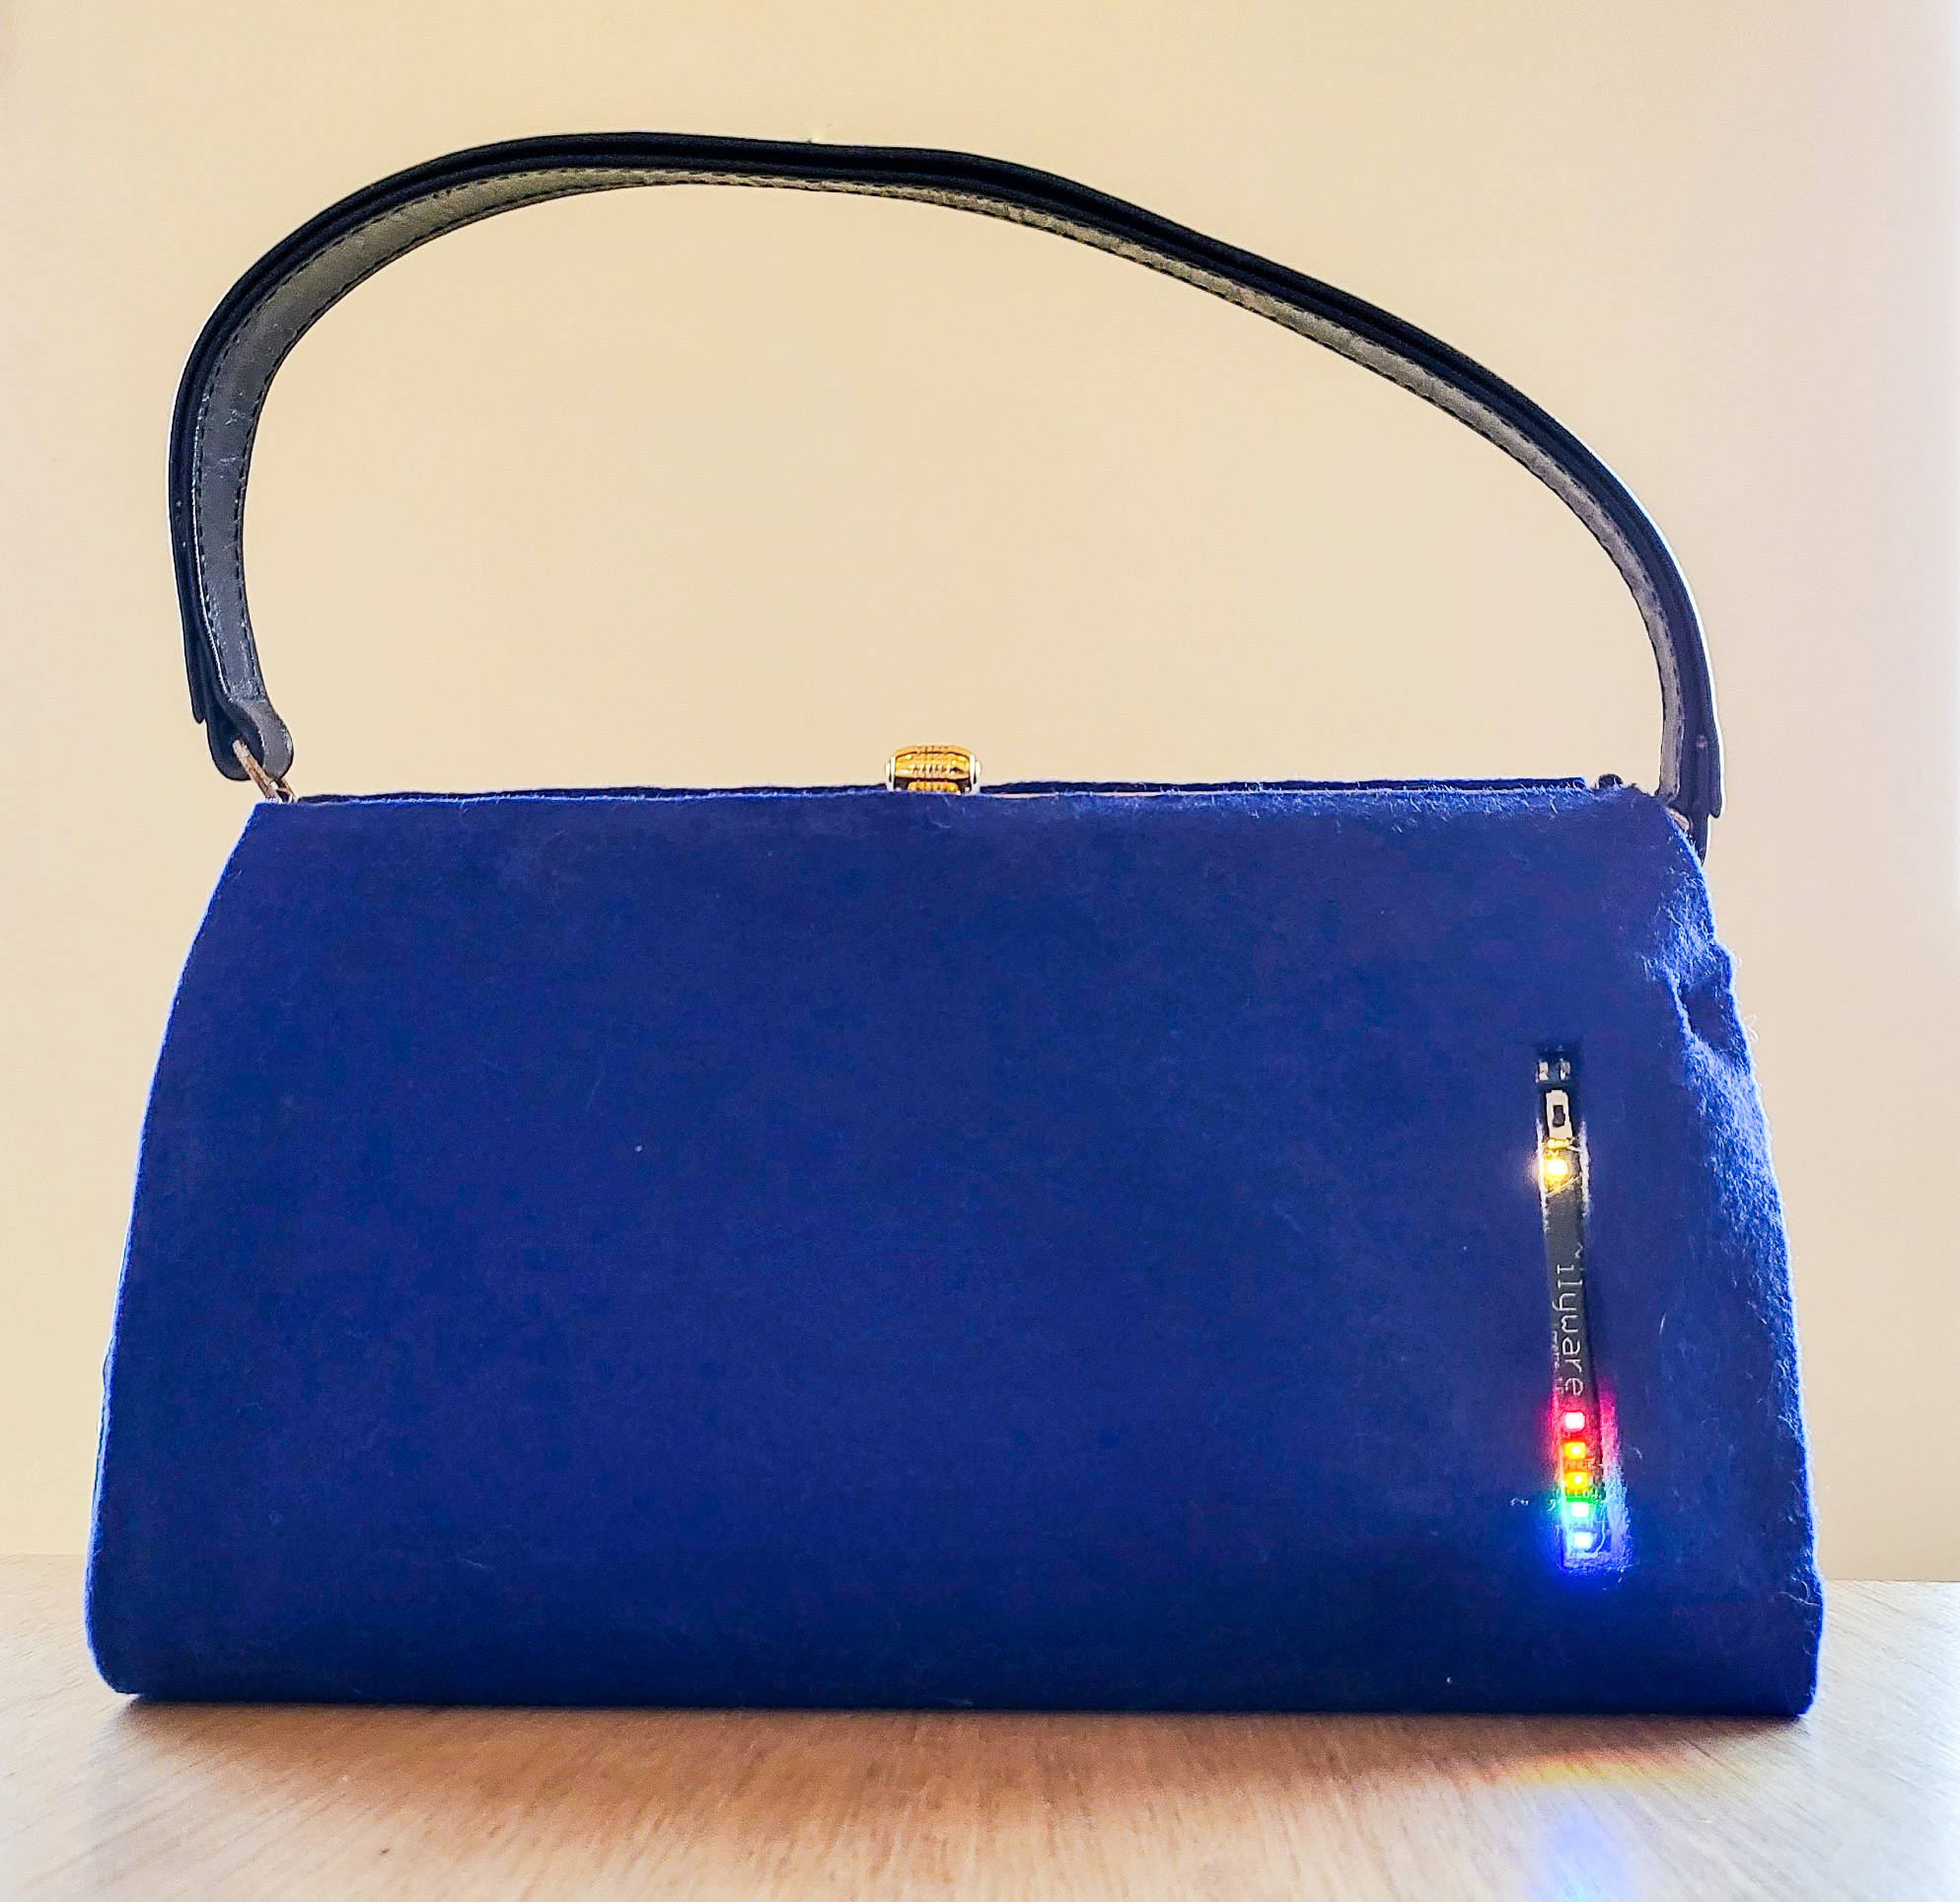 electronic handbag with lights on the front